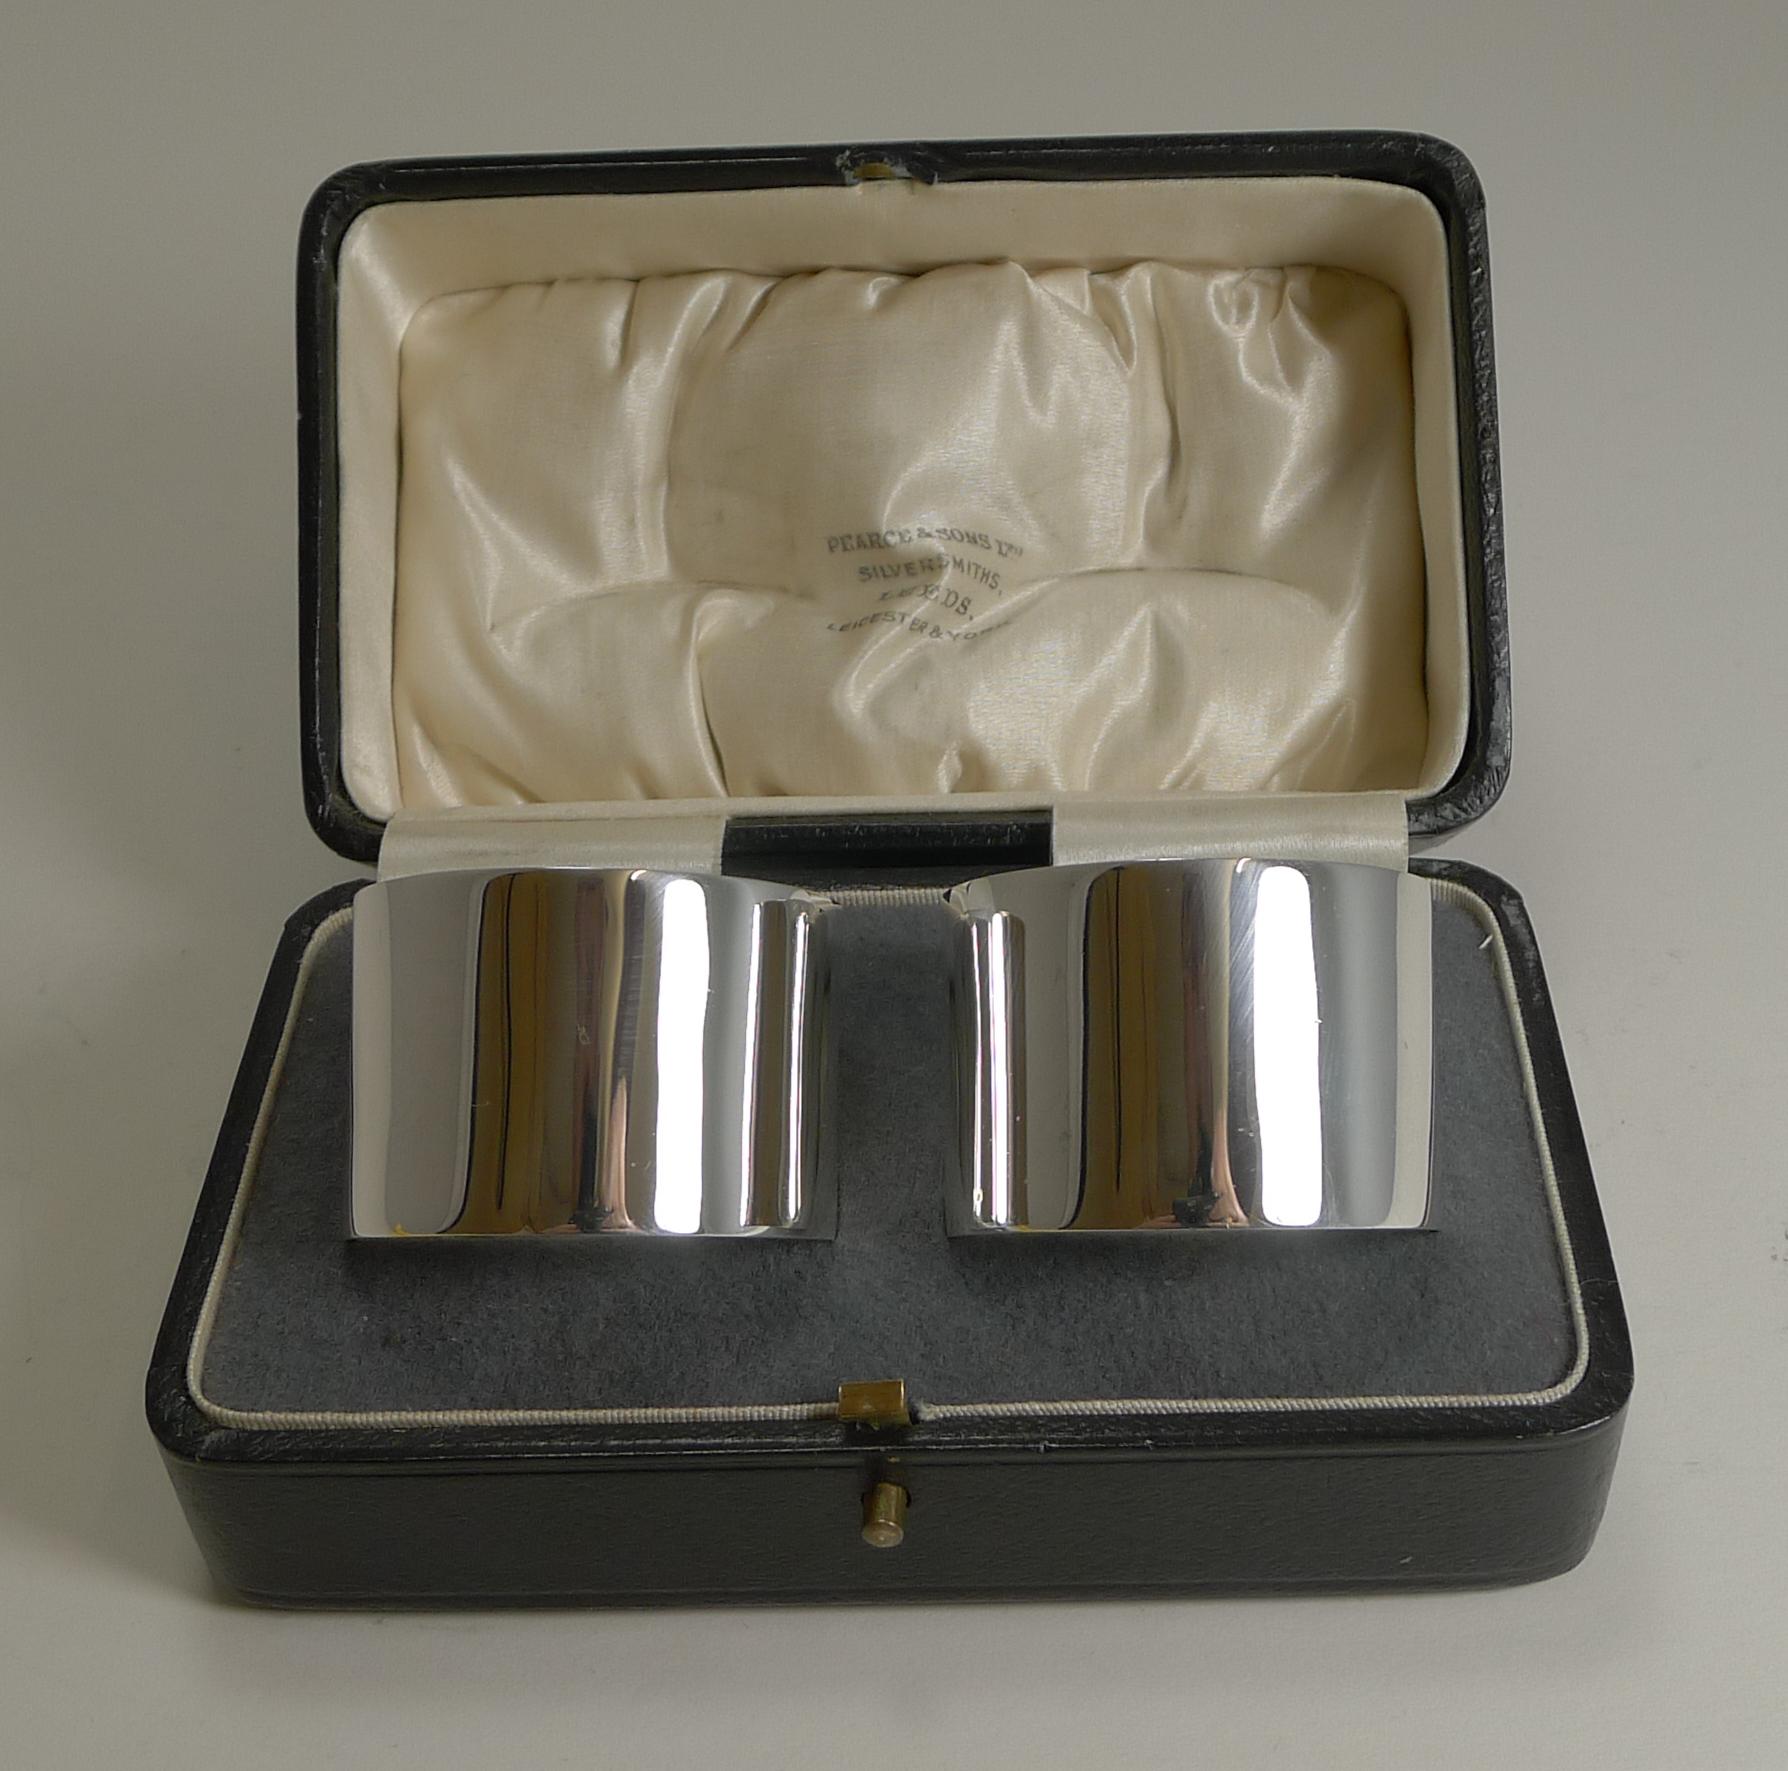 A very smart and elegant pair of English sterling silver napkin rings, perfect if you are looking for something simple or with a more contemporary design.

95 years old and fully hallmarked with the highly collectable Chester assay office and the